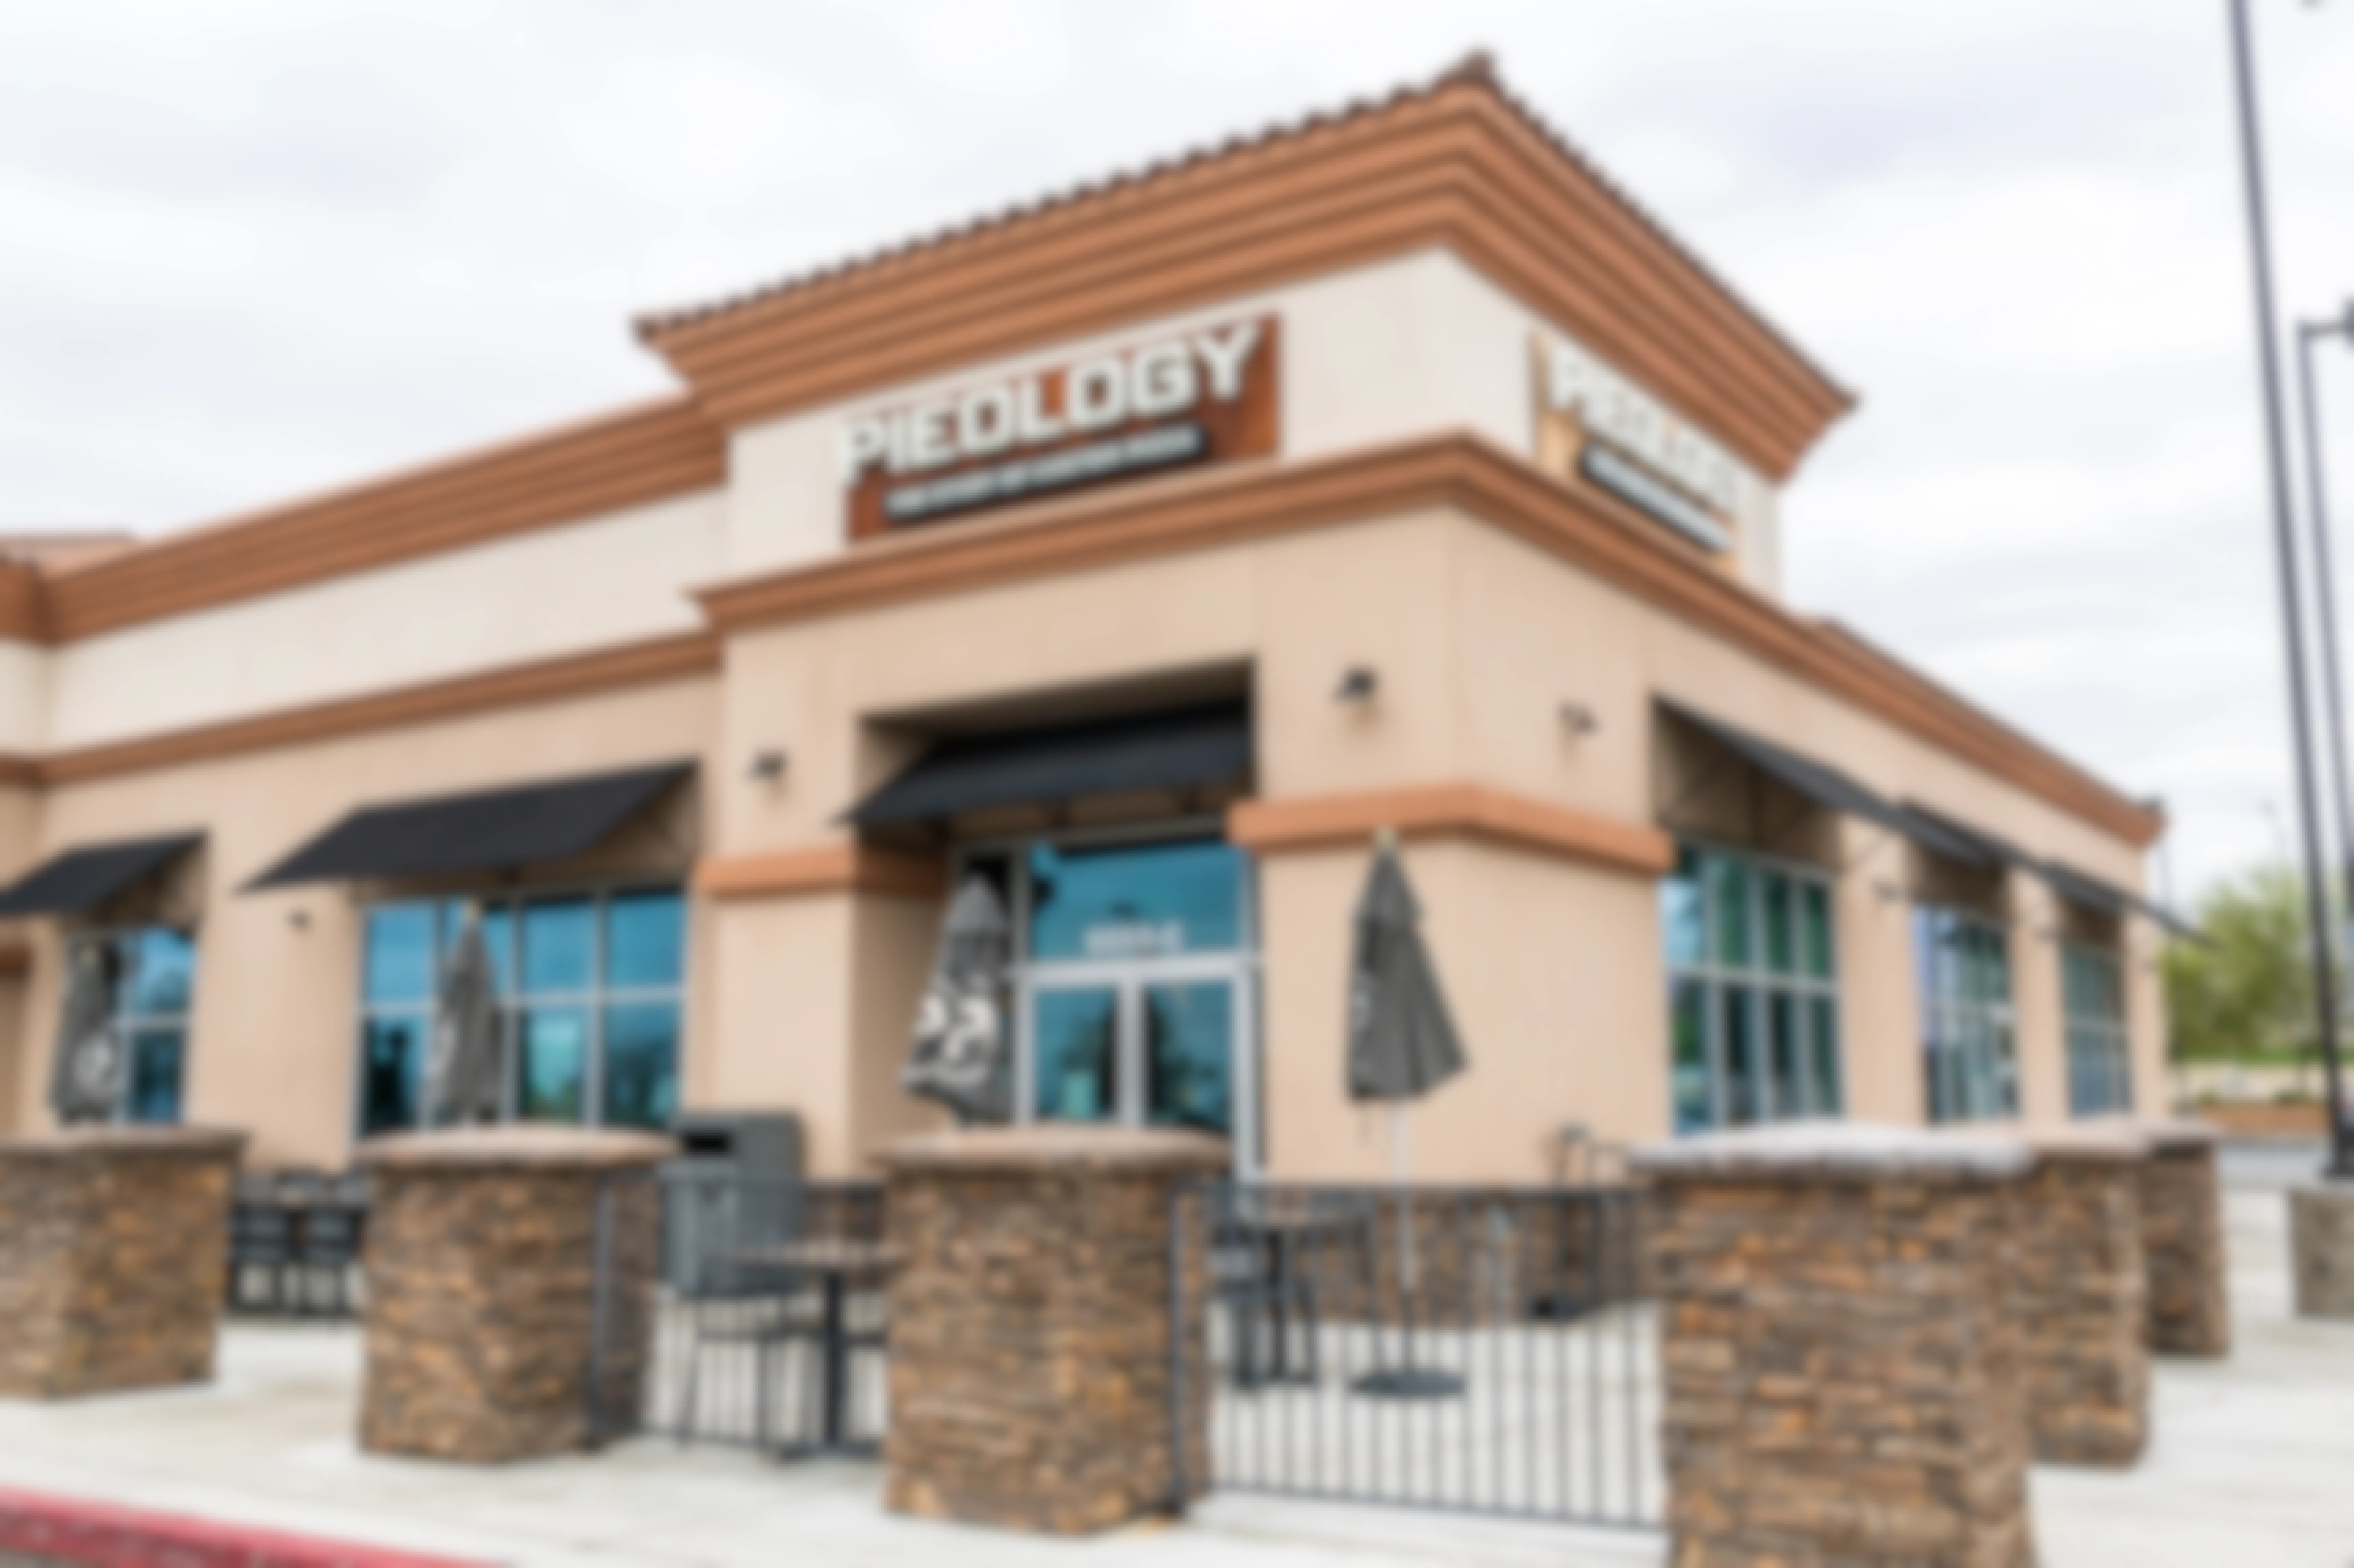 Pieology restaurant with outdoor seating